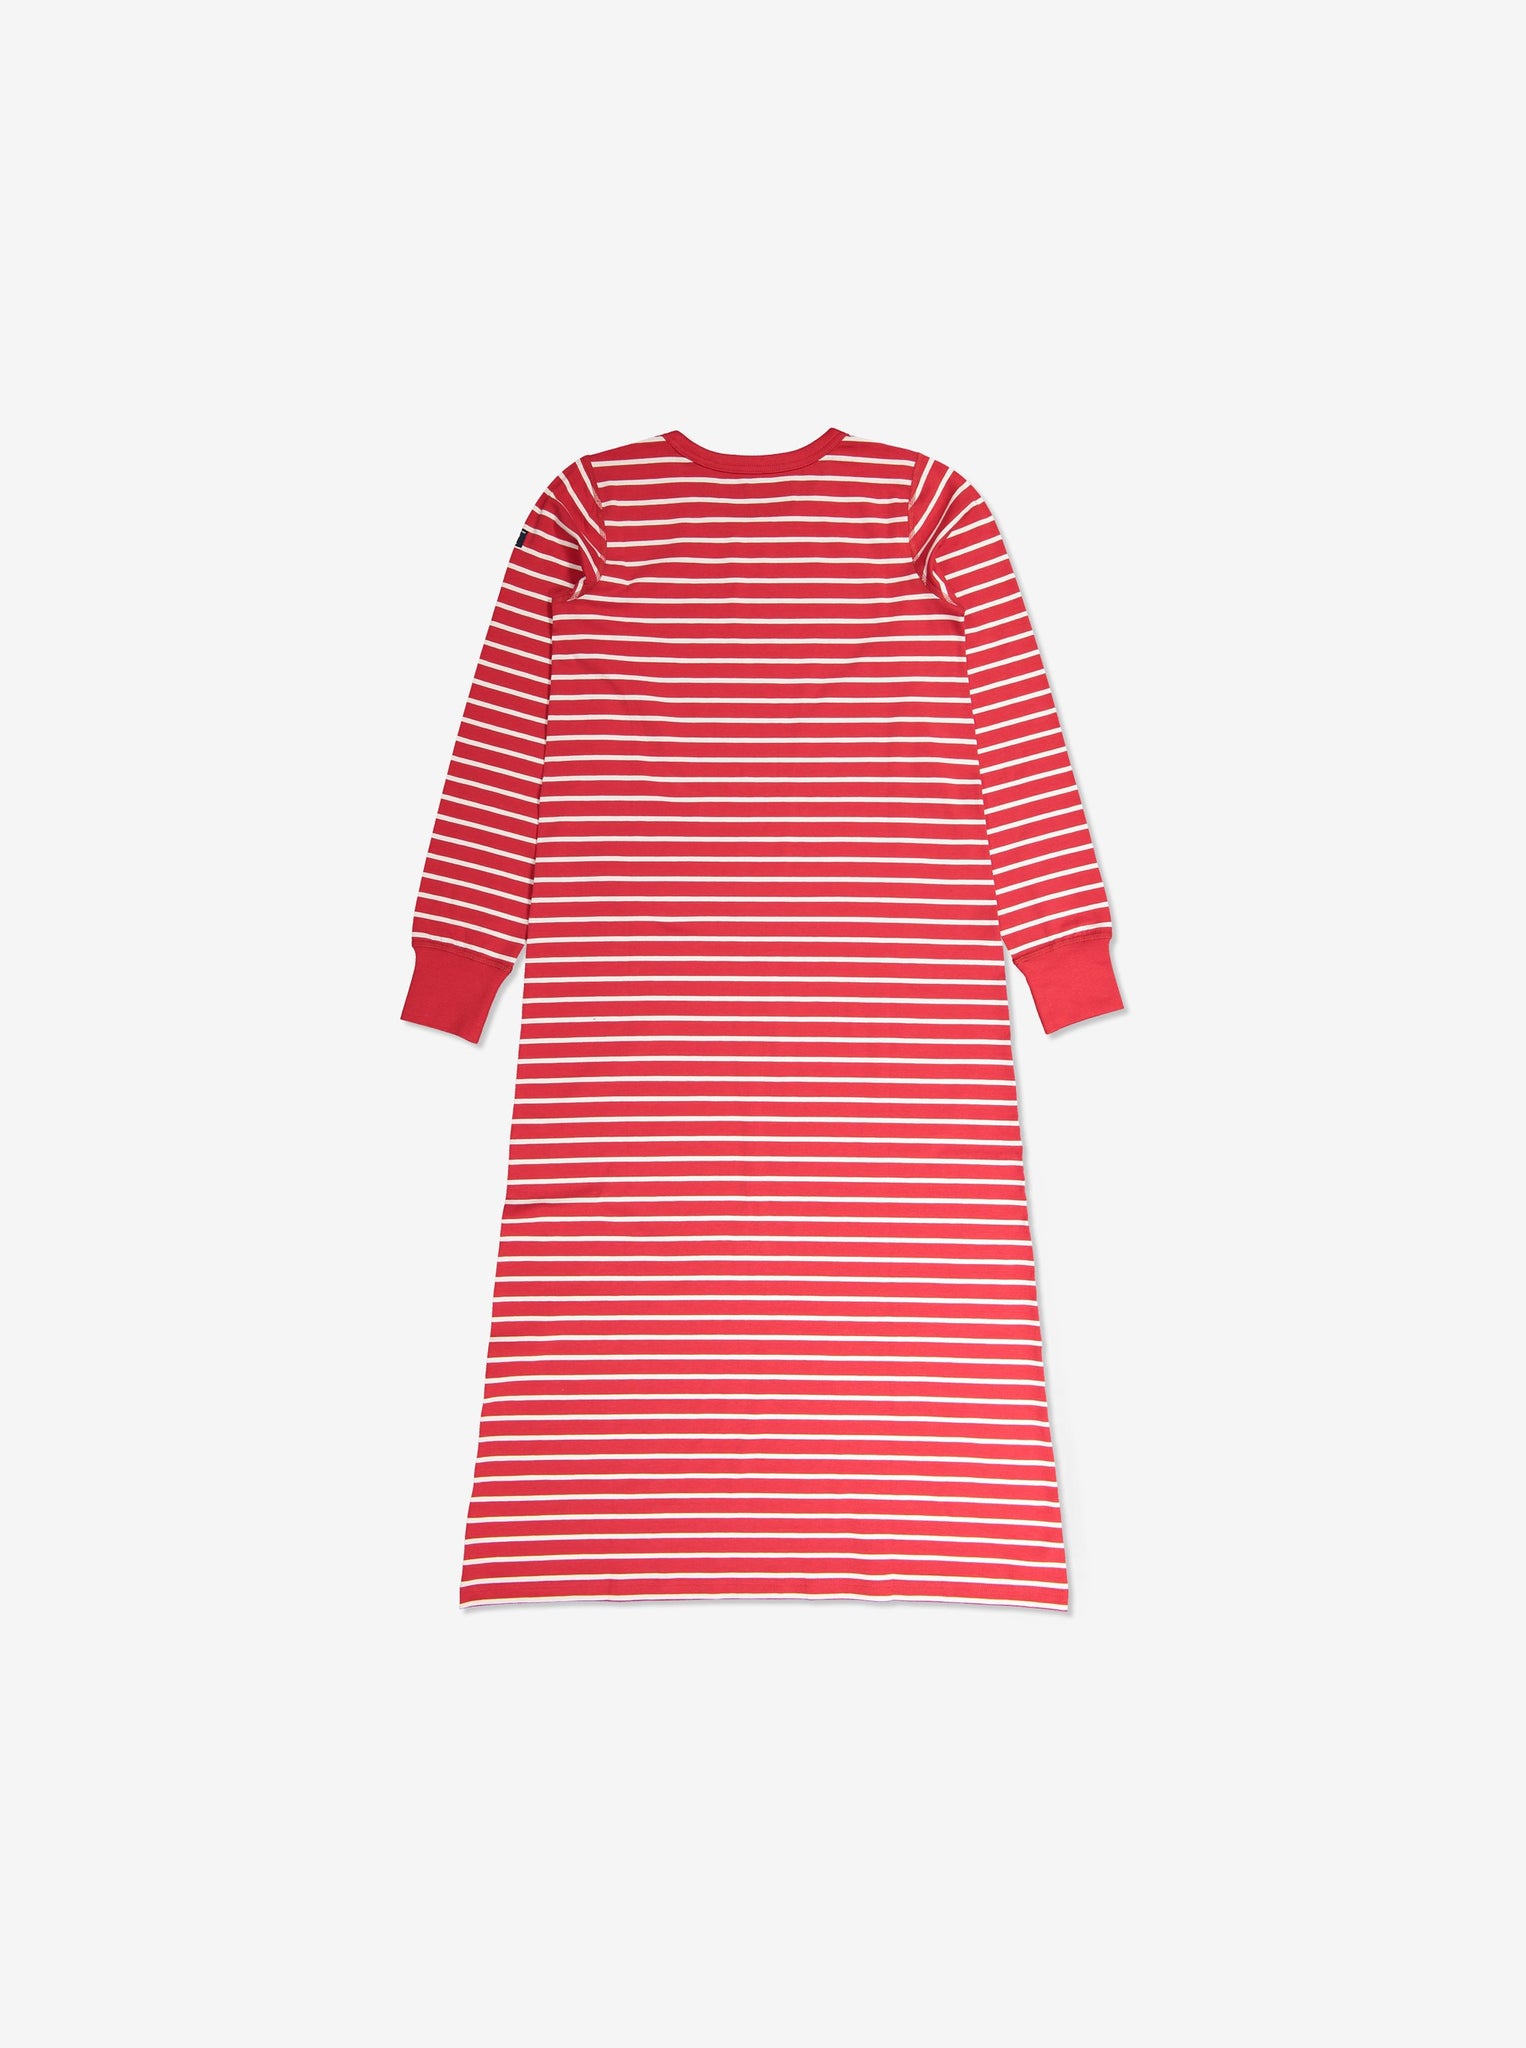 red and white striped Organic Ladies Nightgown, Ladies Sustainable Clothing, warm long lasting durable, polarn o. pyret ethical